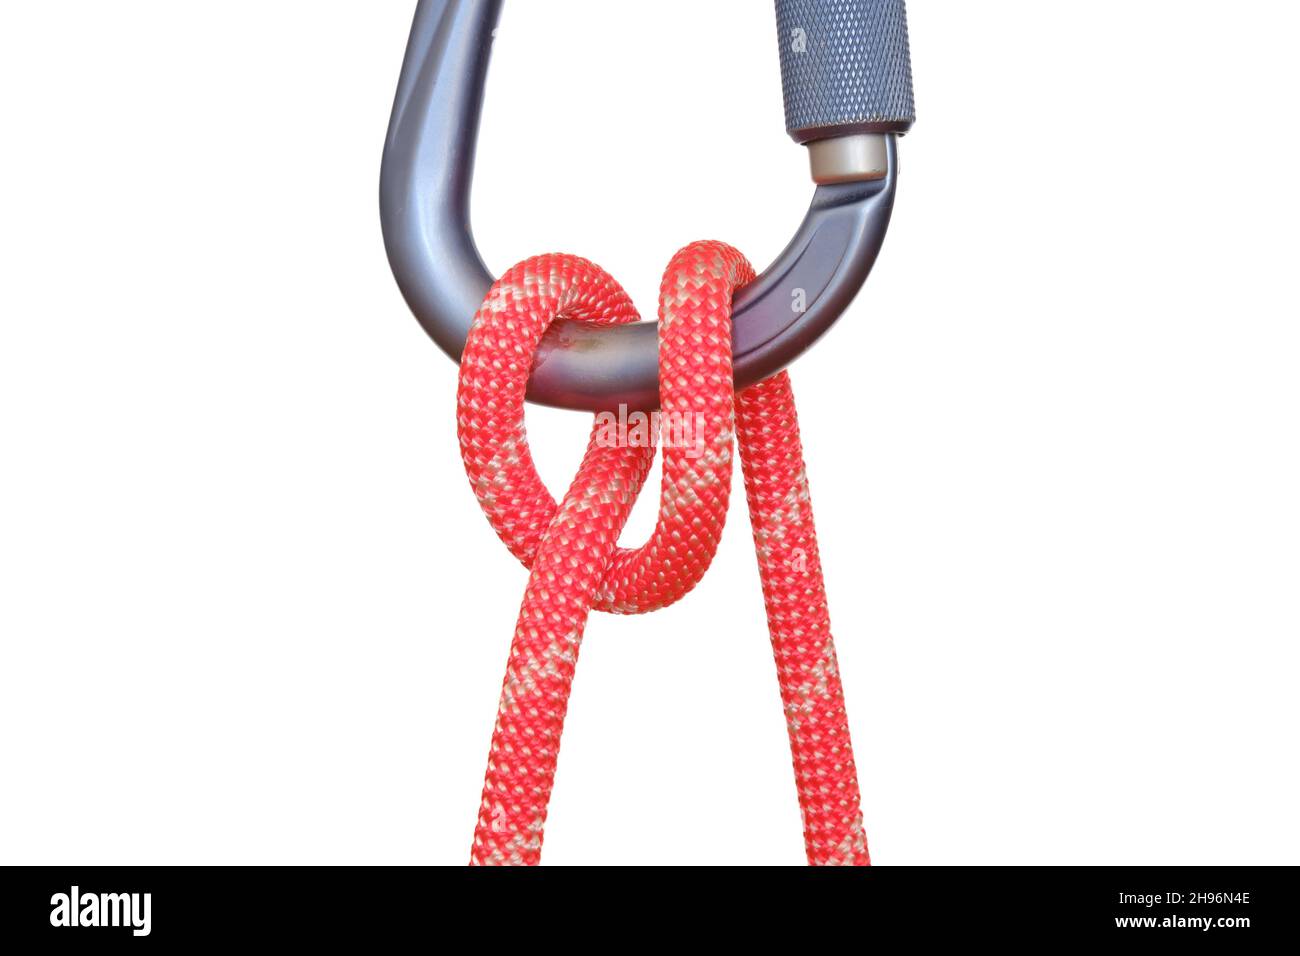 Munter hitch tied with red rope on carabiner, isolated on white